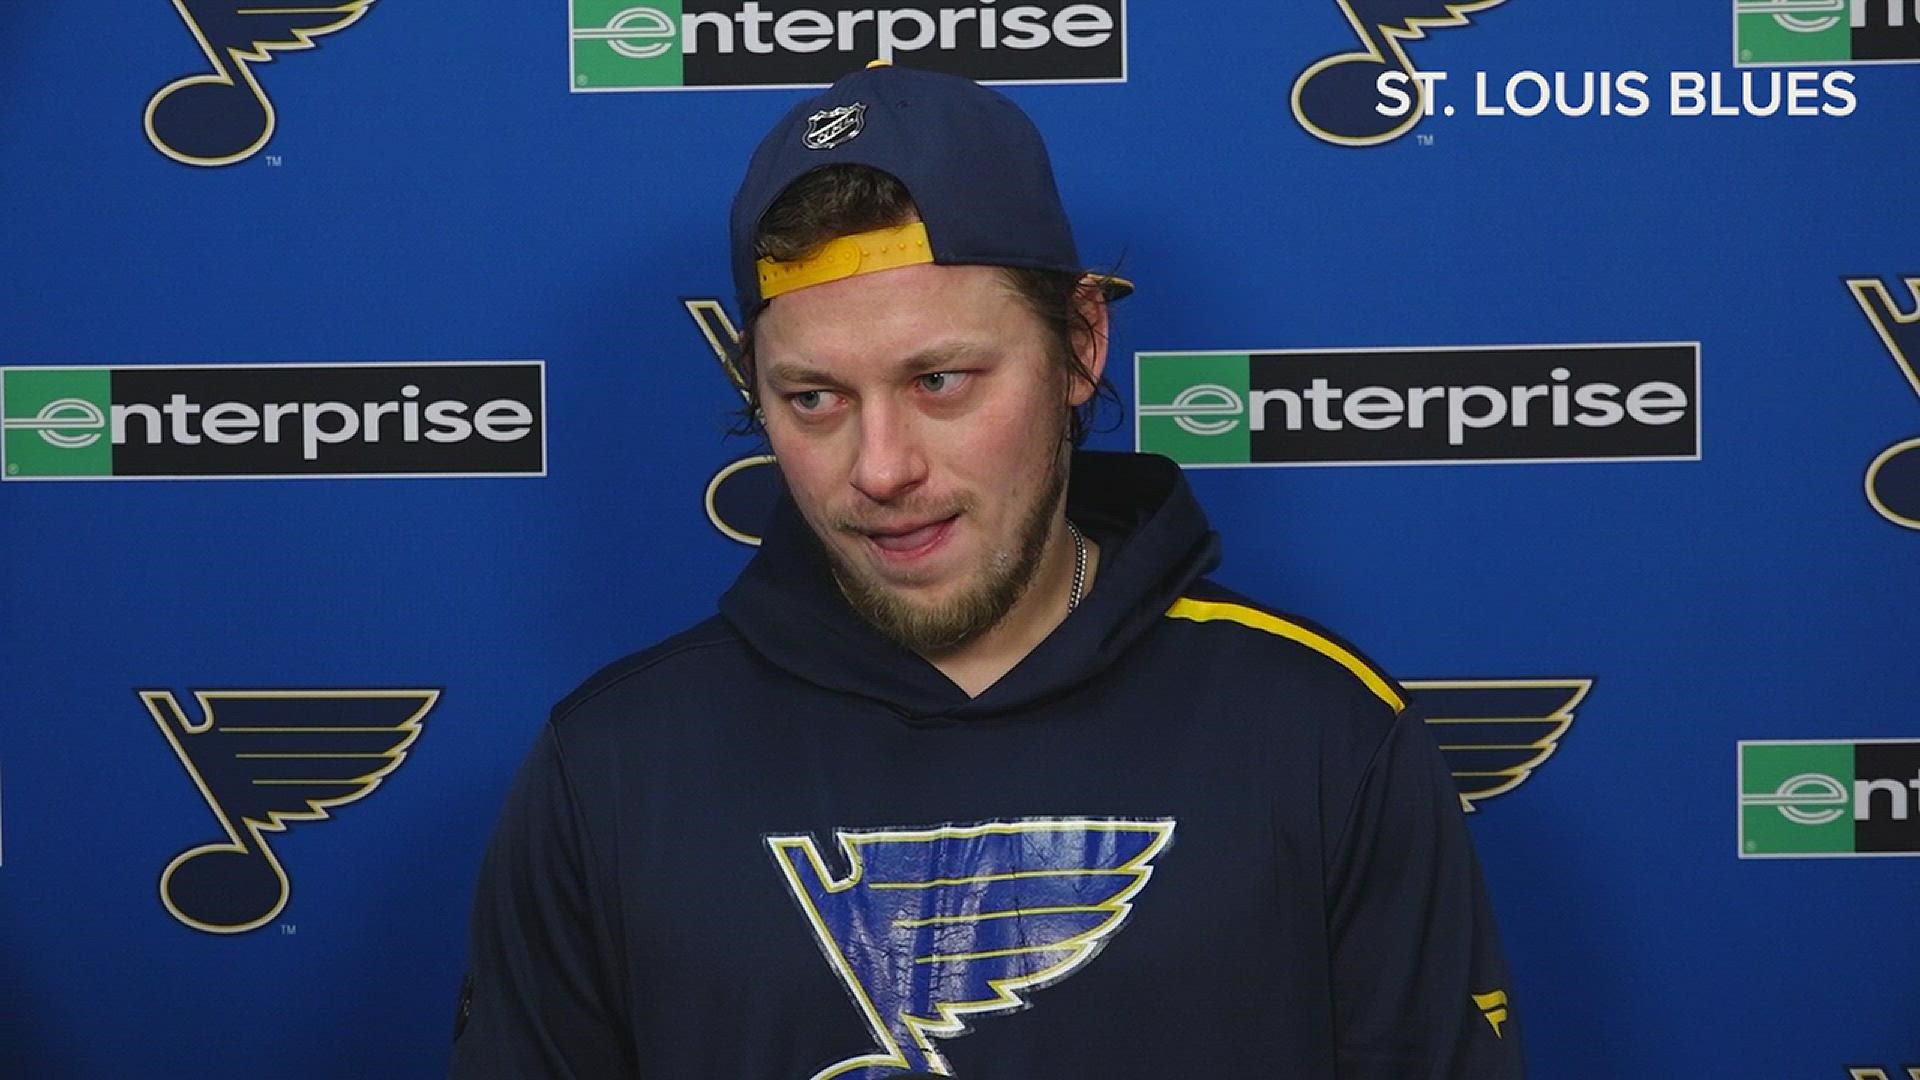 Tarasenko led the Blues in goals and points in the regular season. He talked about his comeback season and his team's playoff chances before the first round.